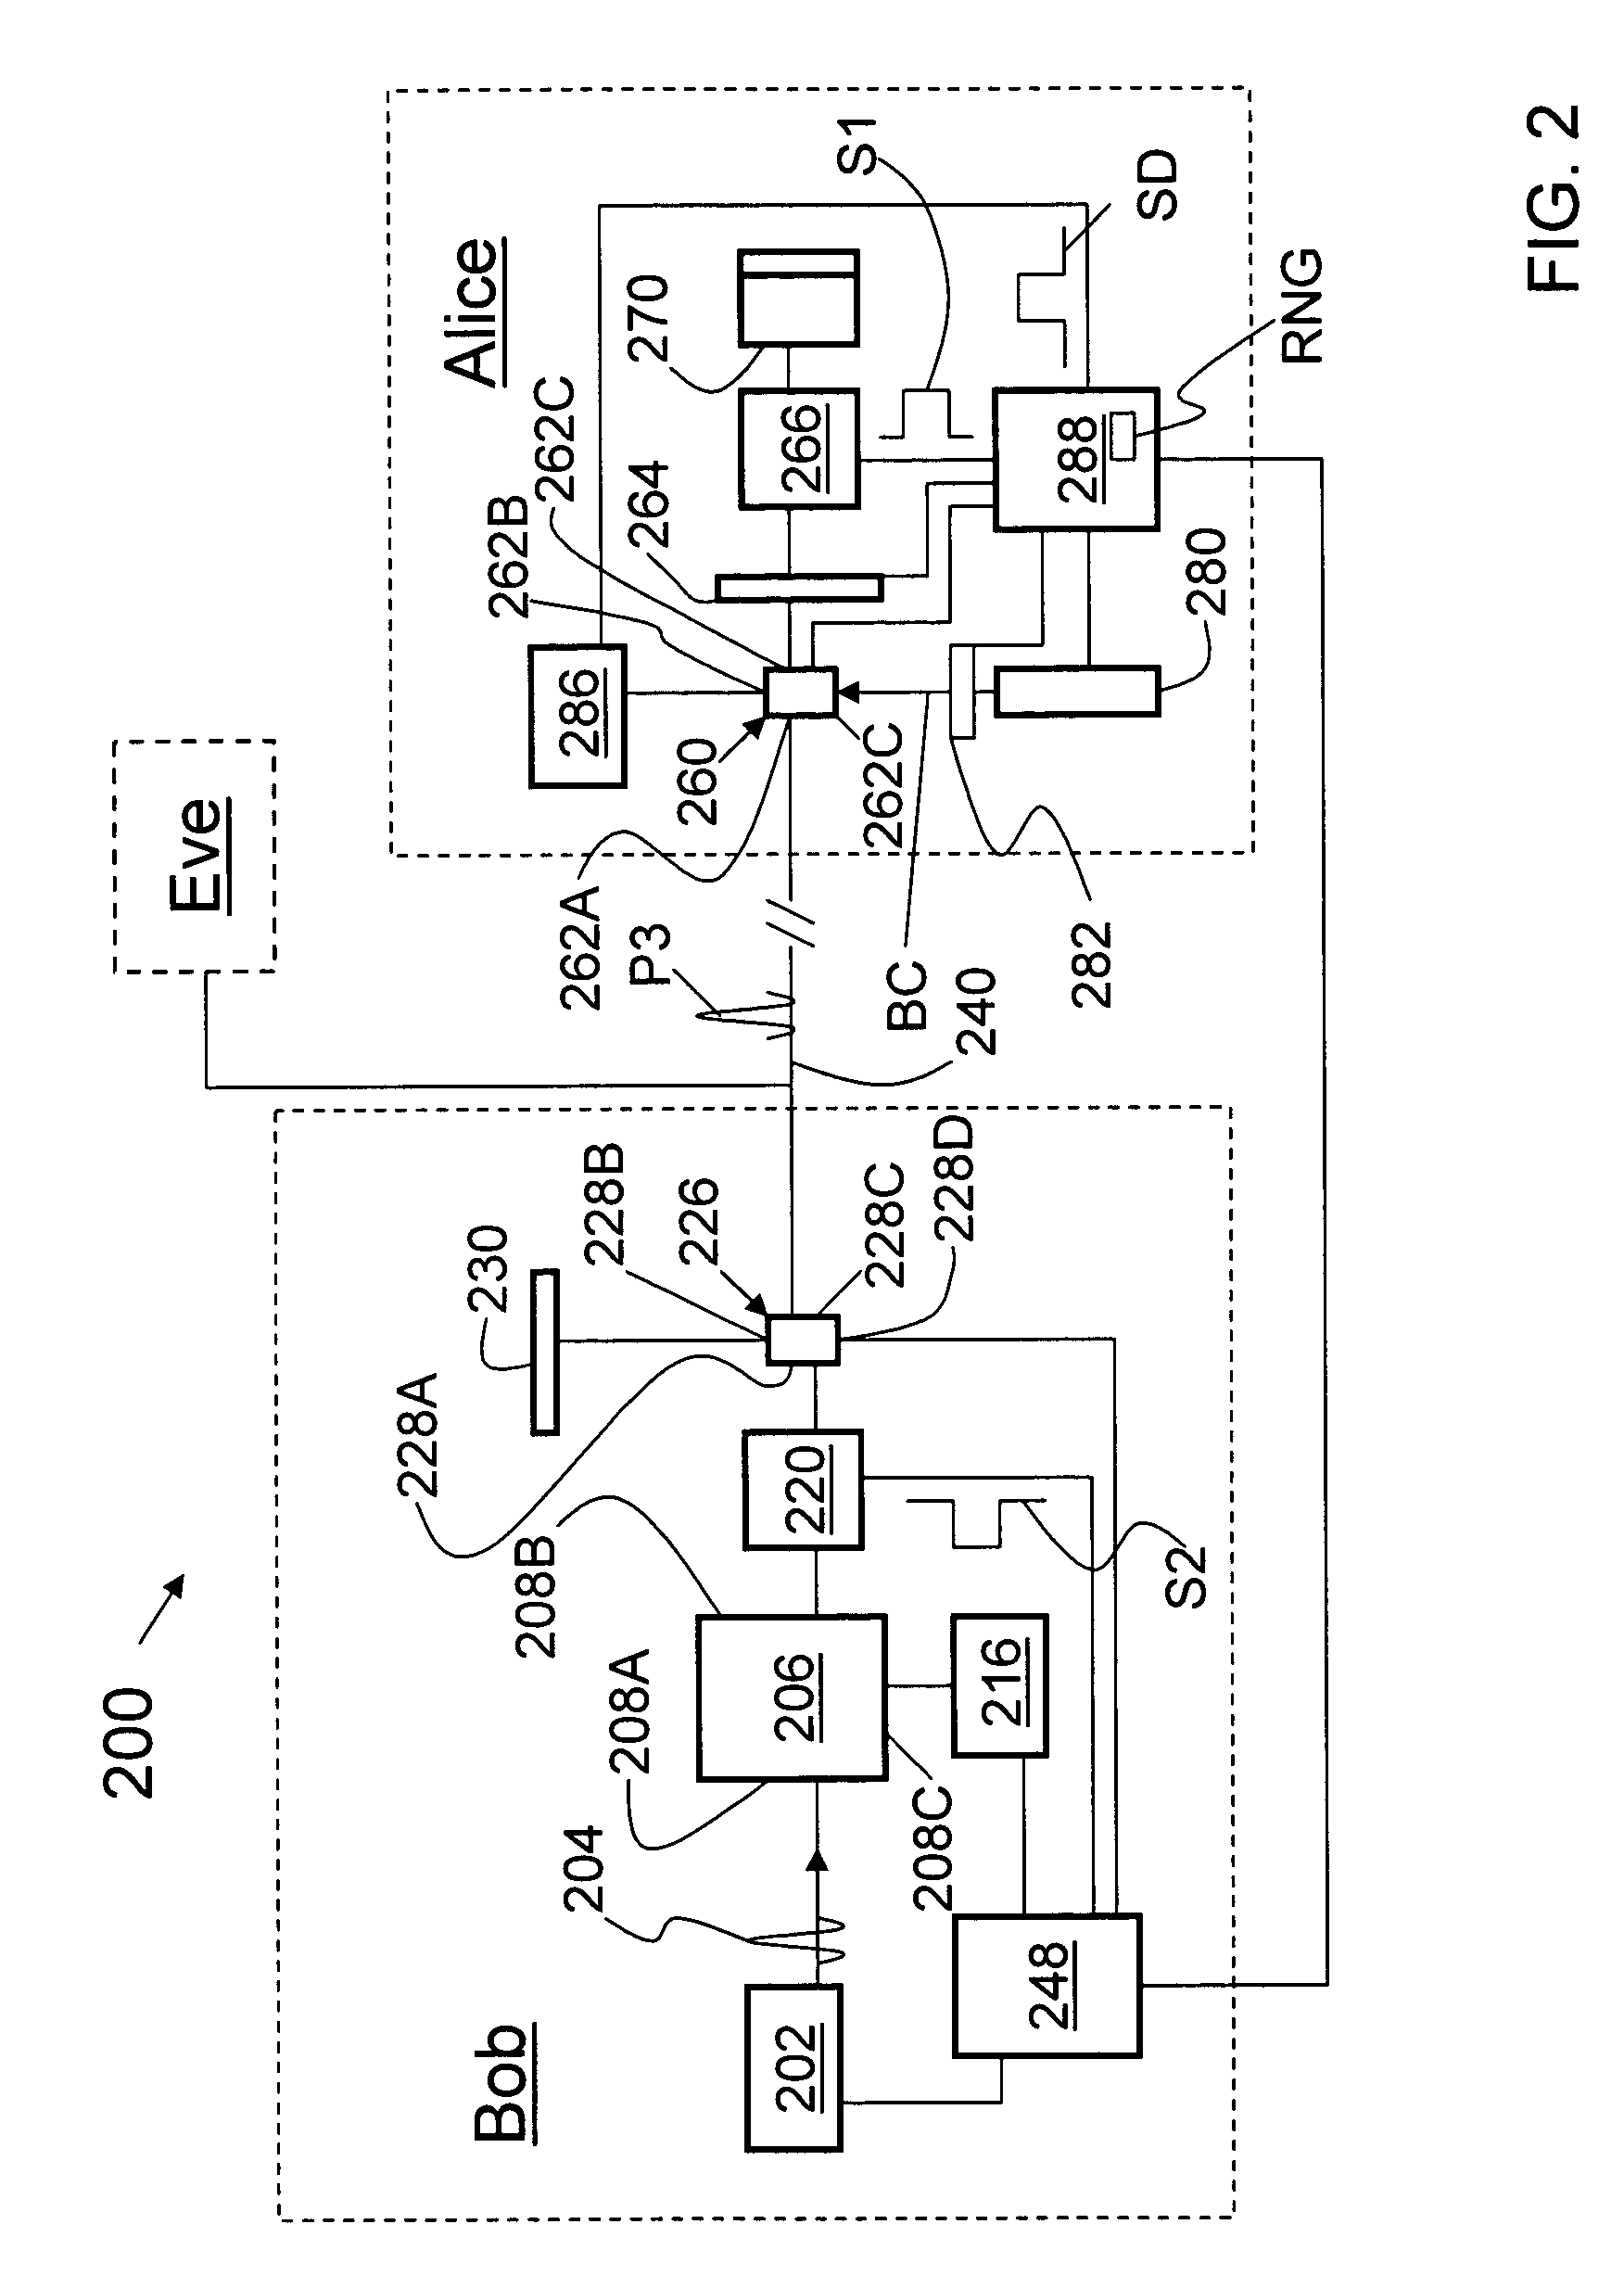 Single-photon watch dog detector for folded quantum key distribution system